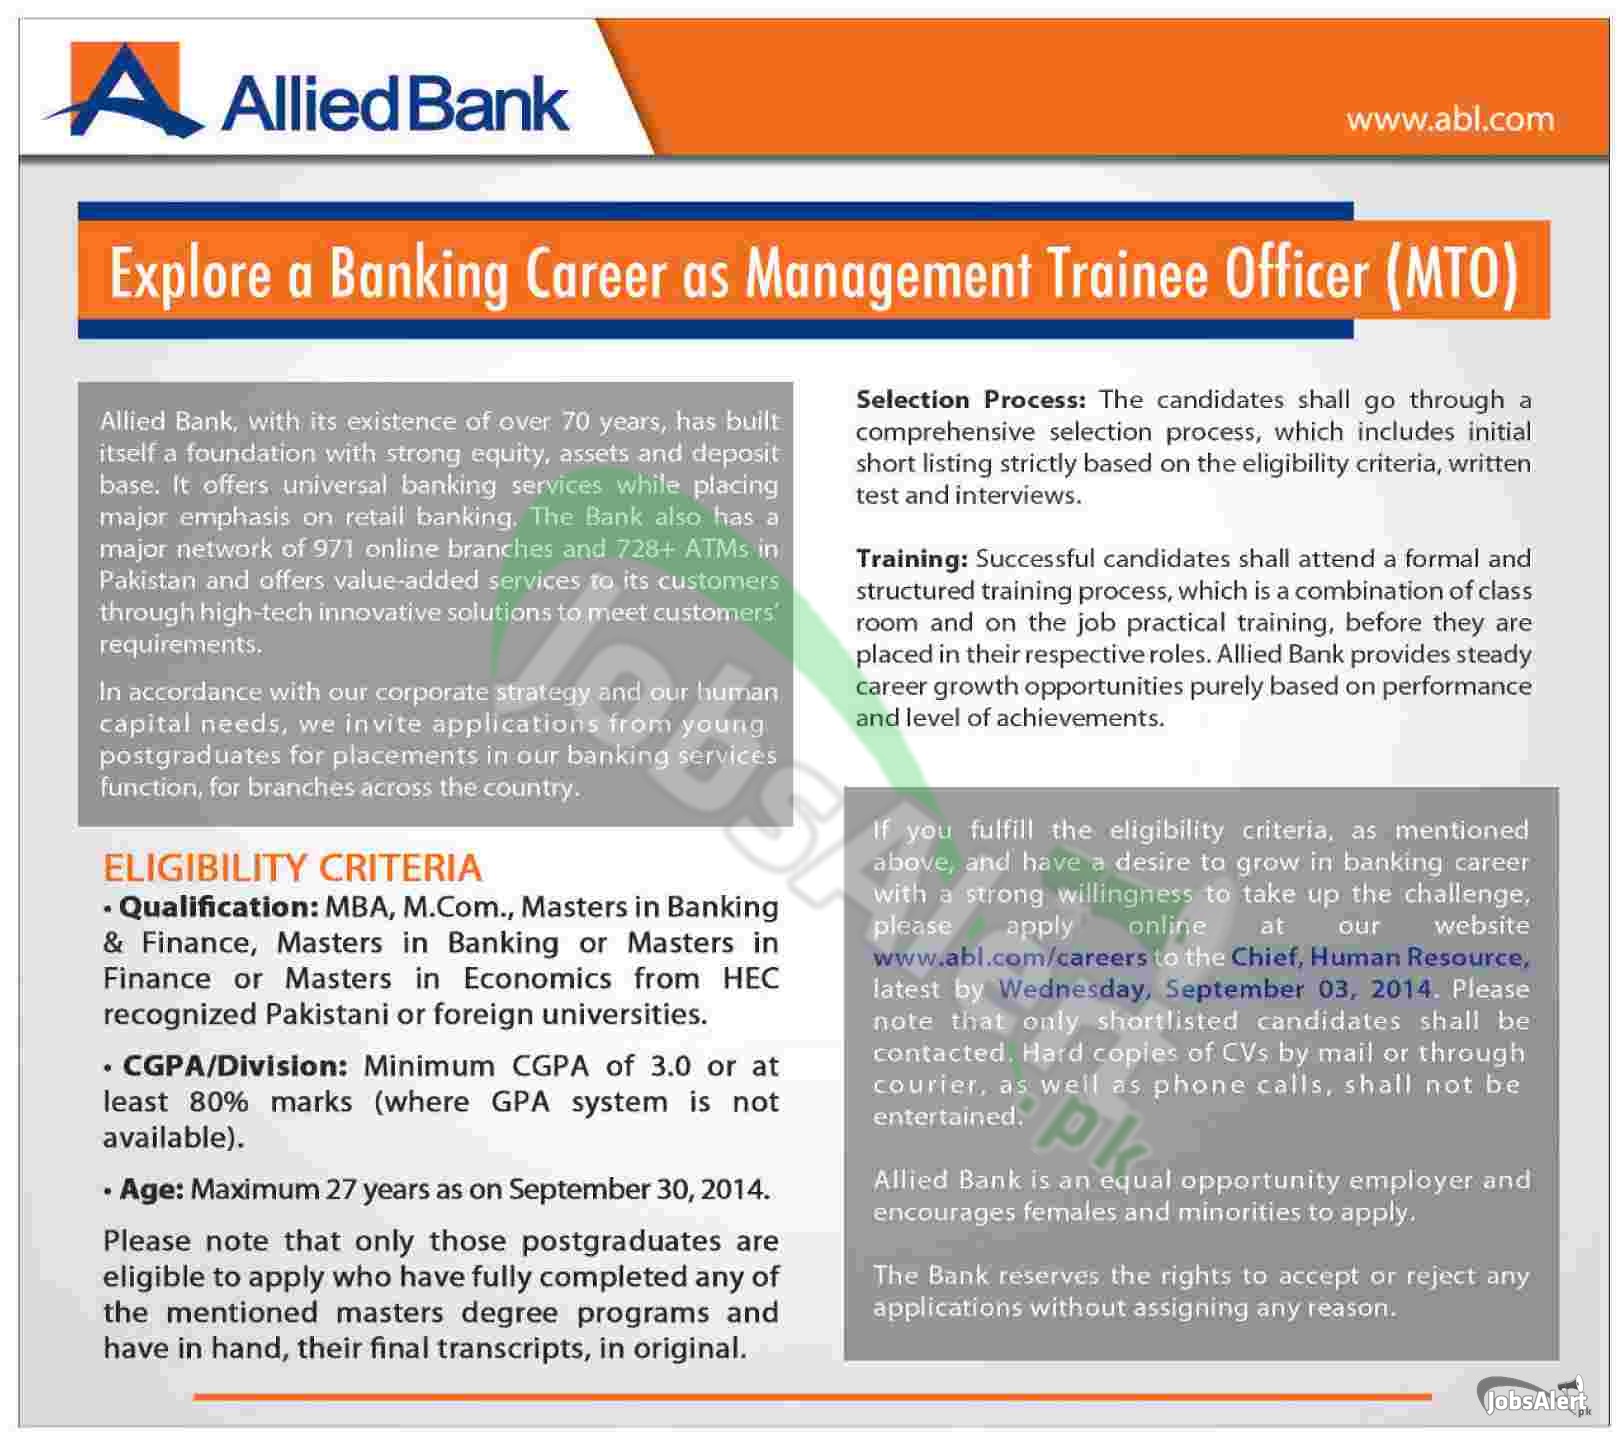 Allied Bank Limited